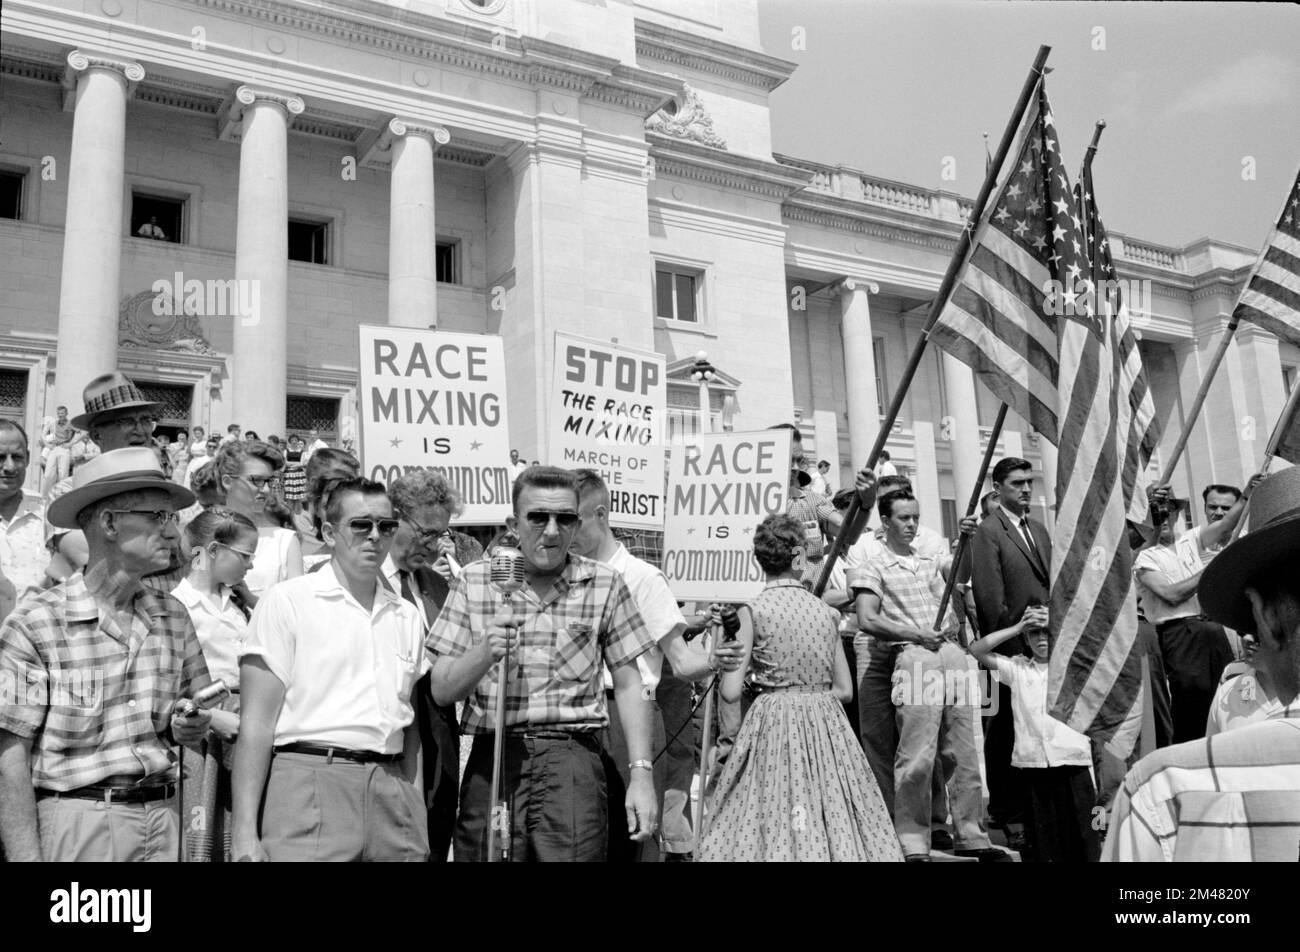 A group of people protesting the admission of the 'Little Rock Nine' to Central High School, Little Rock, Arkansas. The Little Rock Nine were a group of nine African American students enrolled in Little Rock Central High School in 1957. Photo by John T Bledsoe. Stock Photo